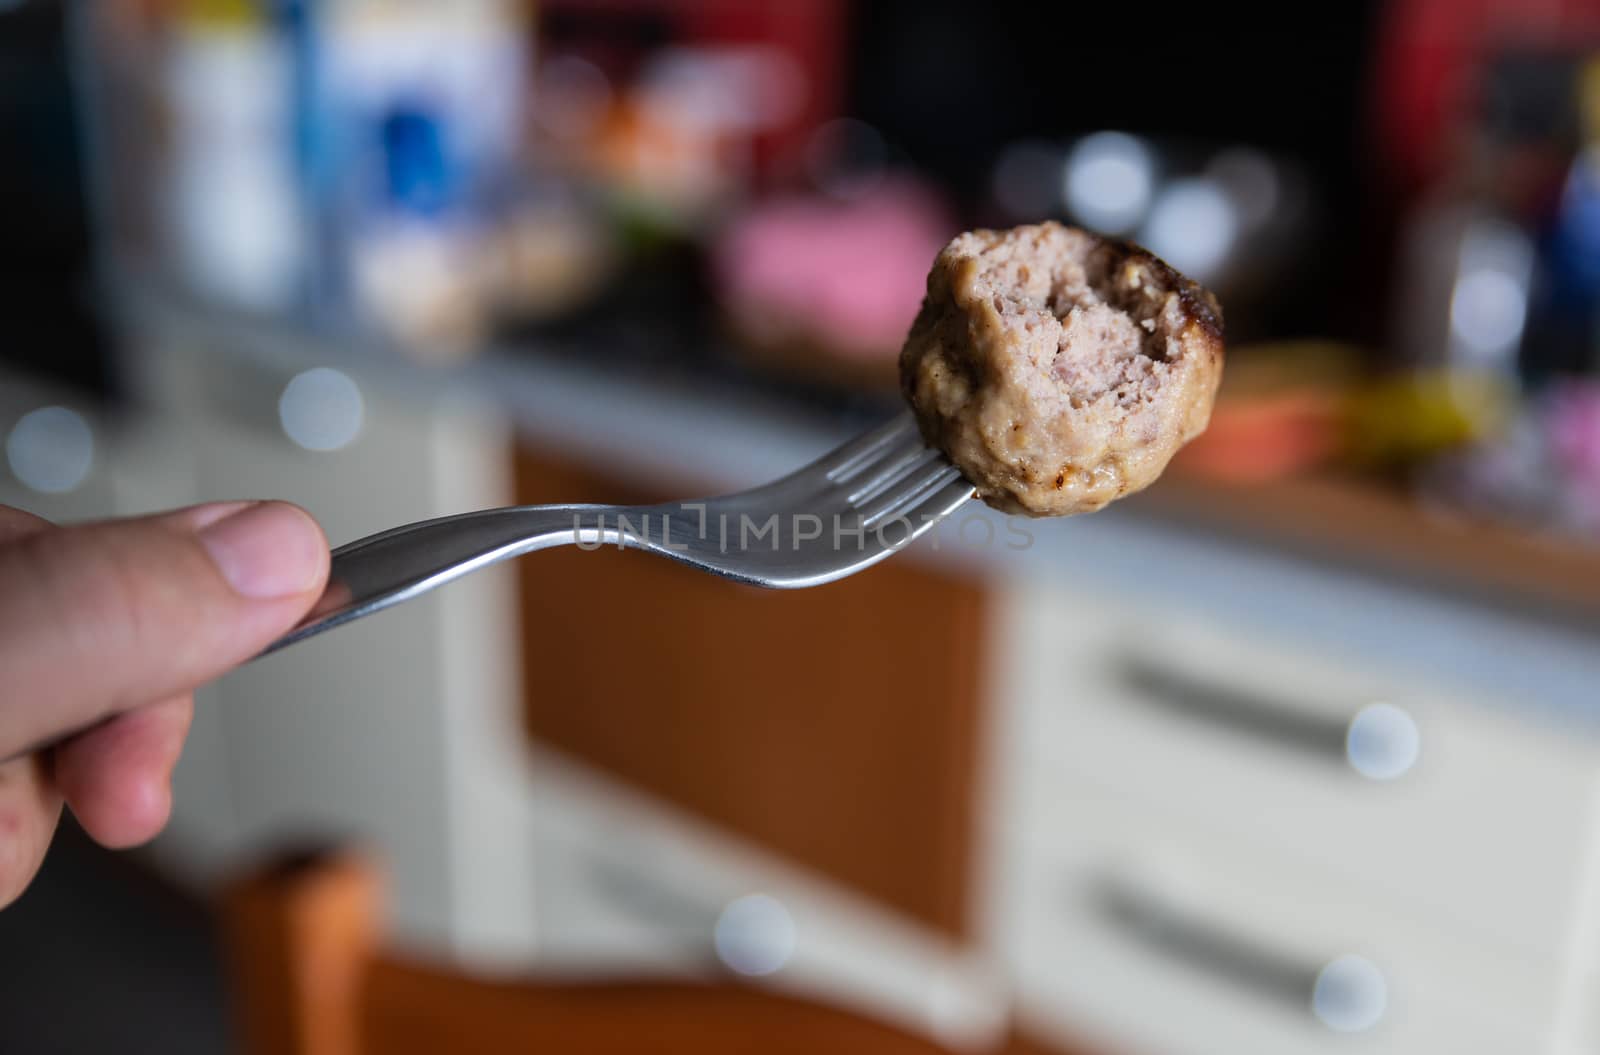 In the blurred background of a kitchen a close-up image of a meatball skewered by a fork. A bite was eaten.